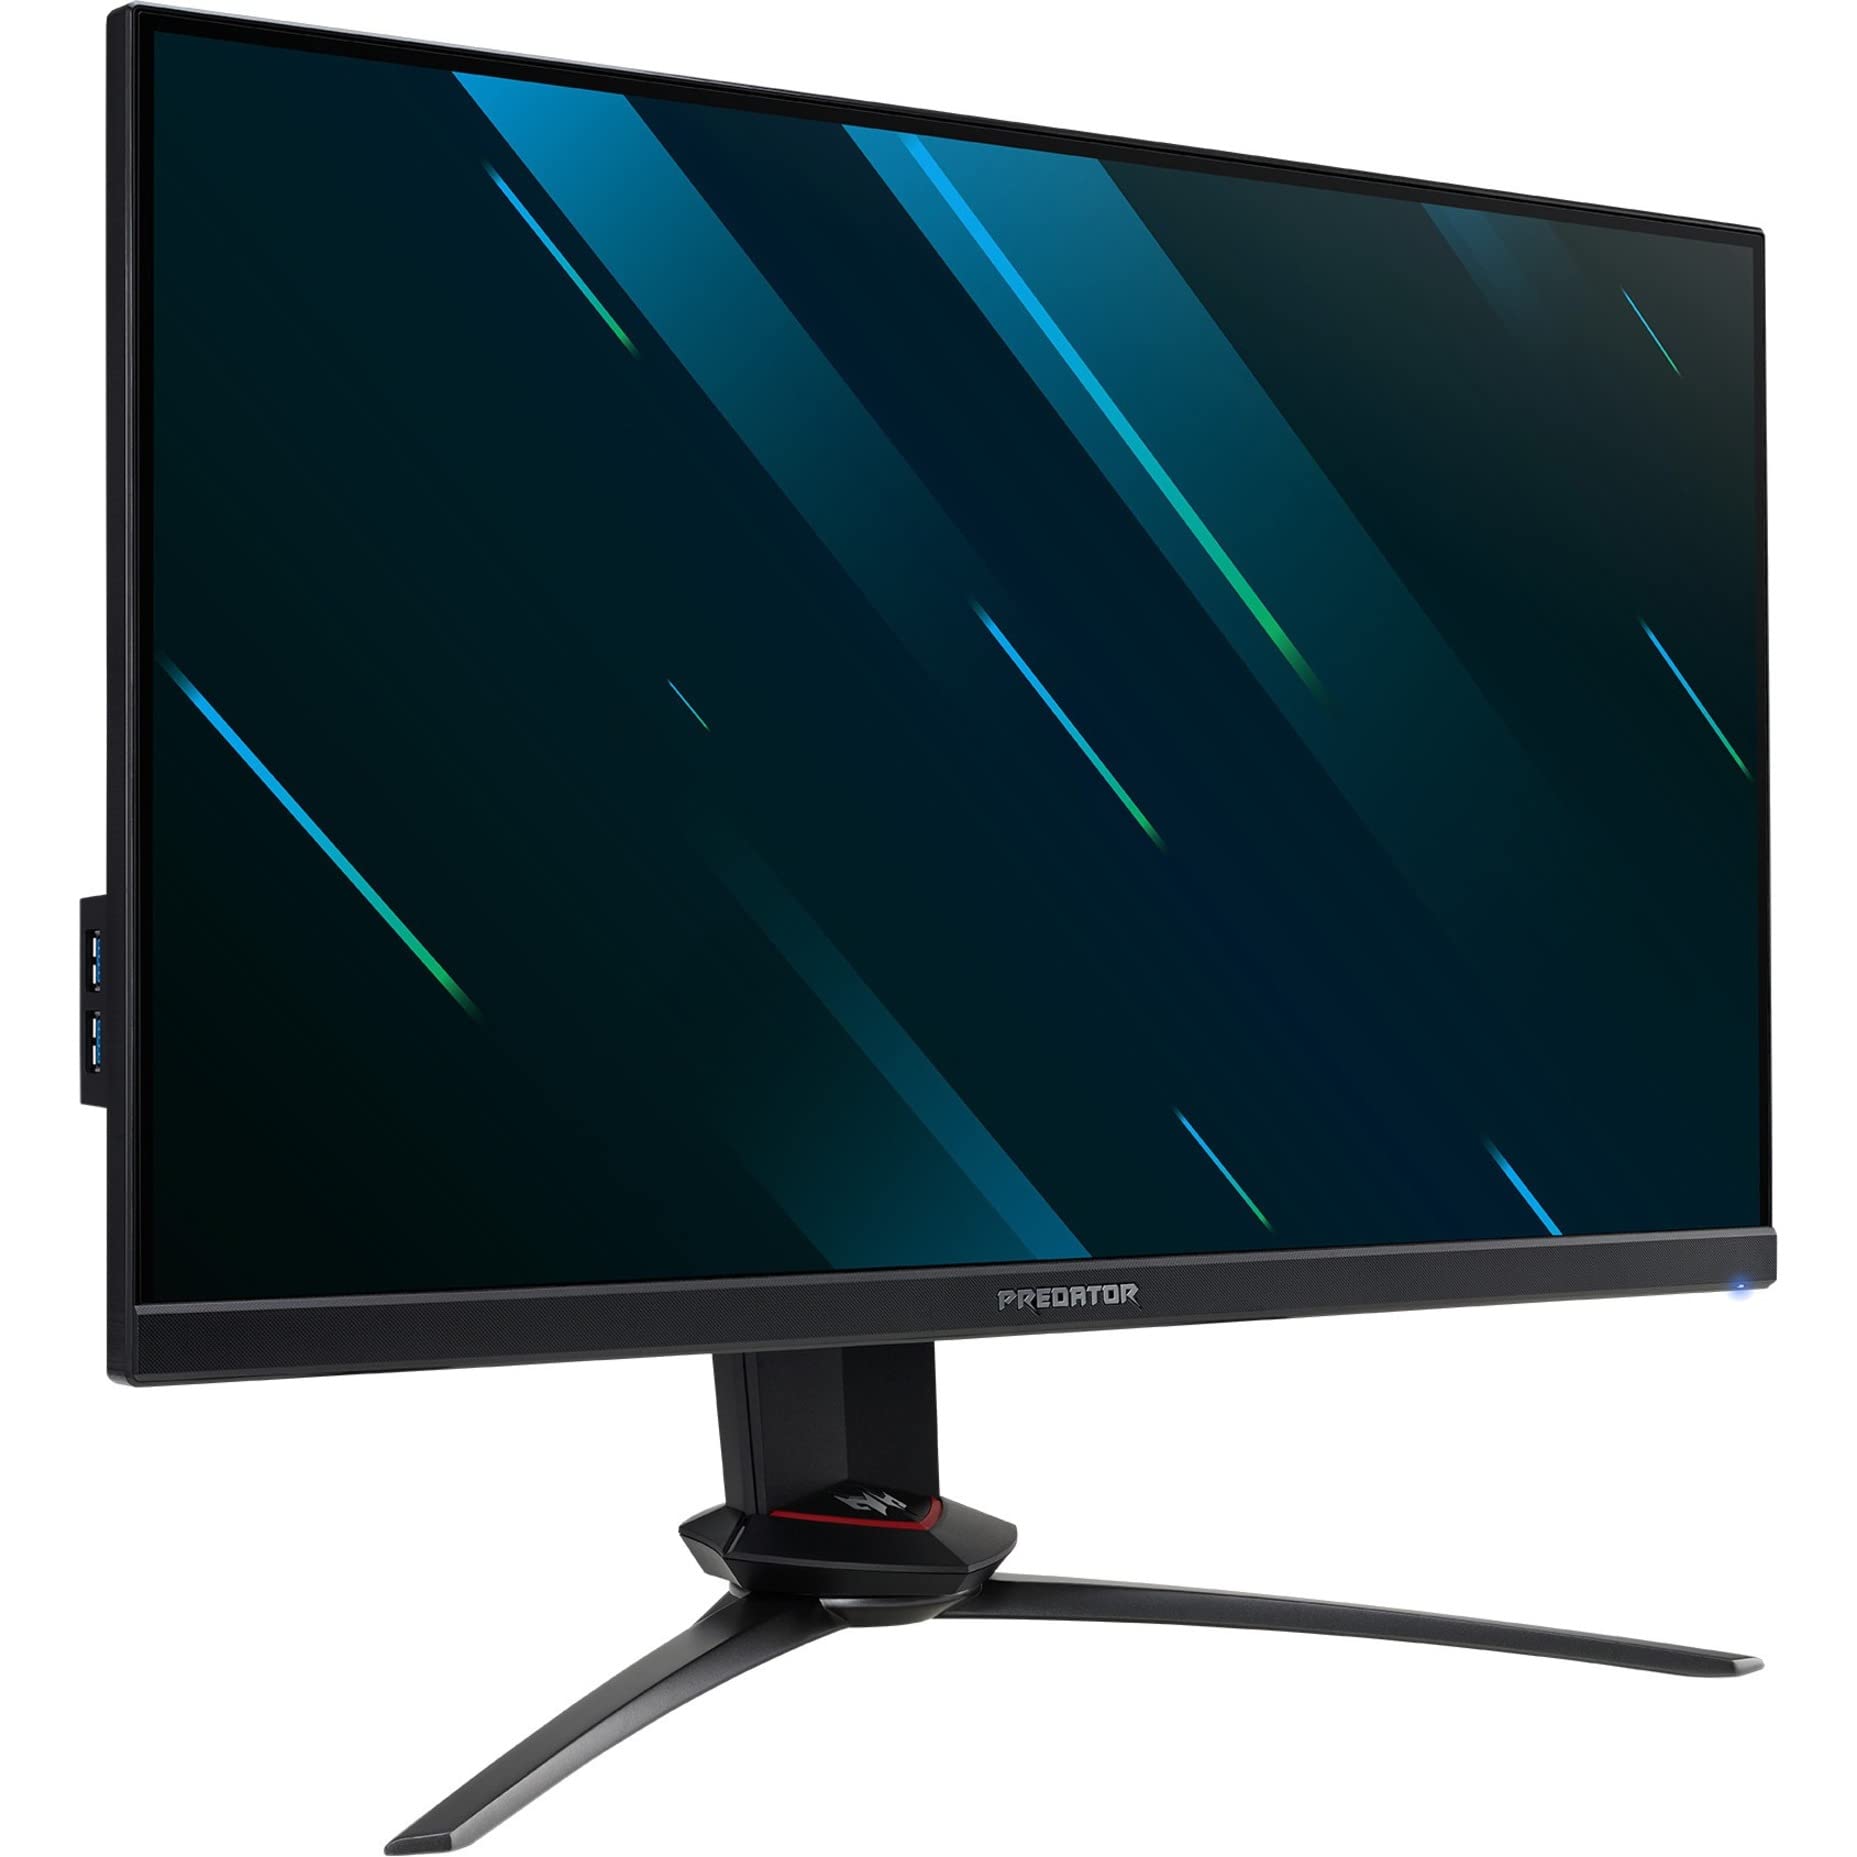 Acer Predator XB253Q Gpbmiiprzx 24.5" FHD (1920 x 1080) IPS NVIDIA G-SYNC Compatible Gaming Monitor